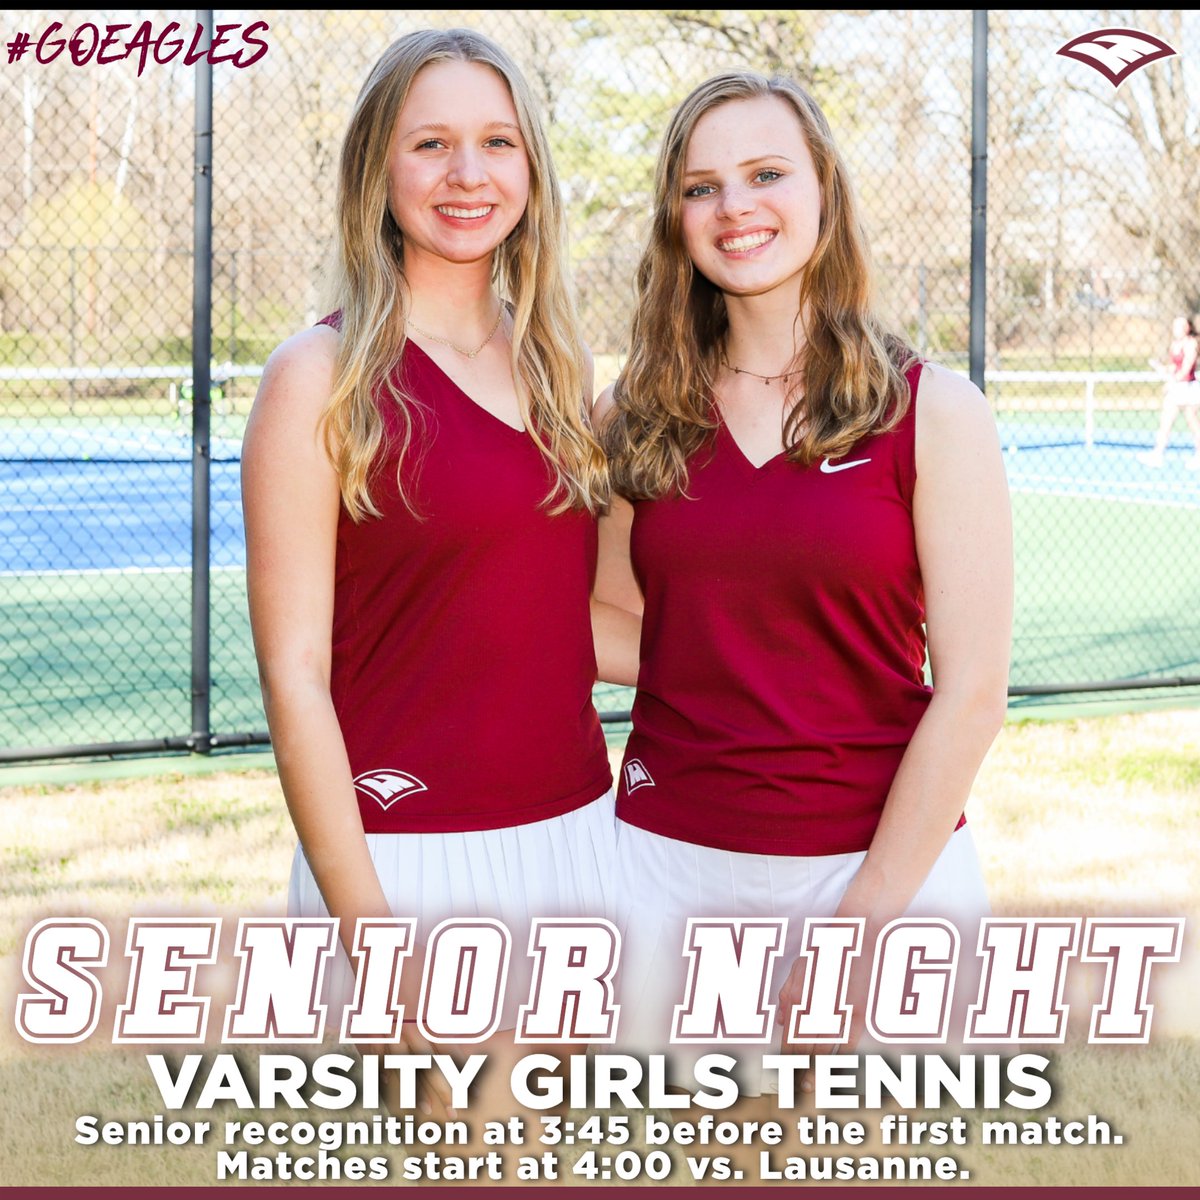 It's Senior Night for our Tennis Teams! Be there at 3:45 as we recognize Noelle and Savannah before the matches start at 4:00 against Lausanne! #GoEagles